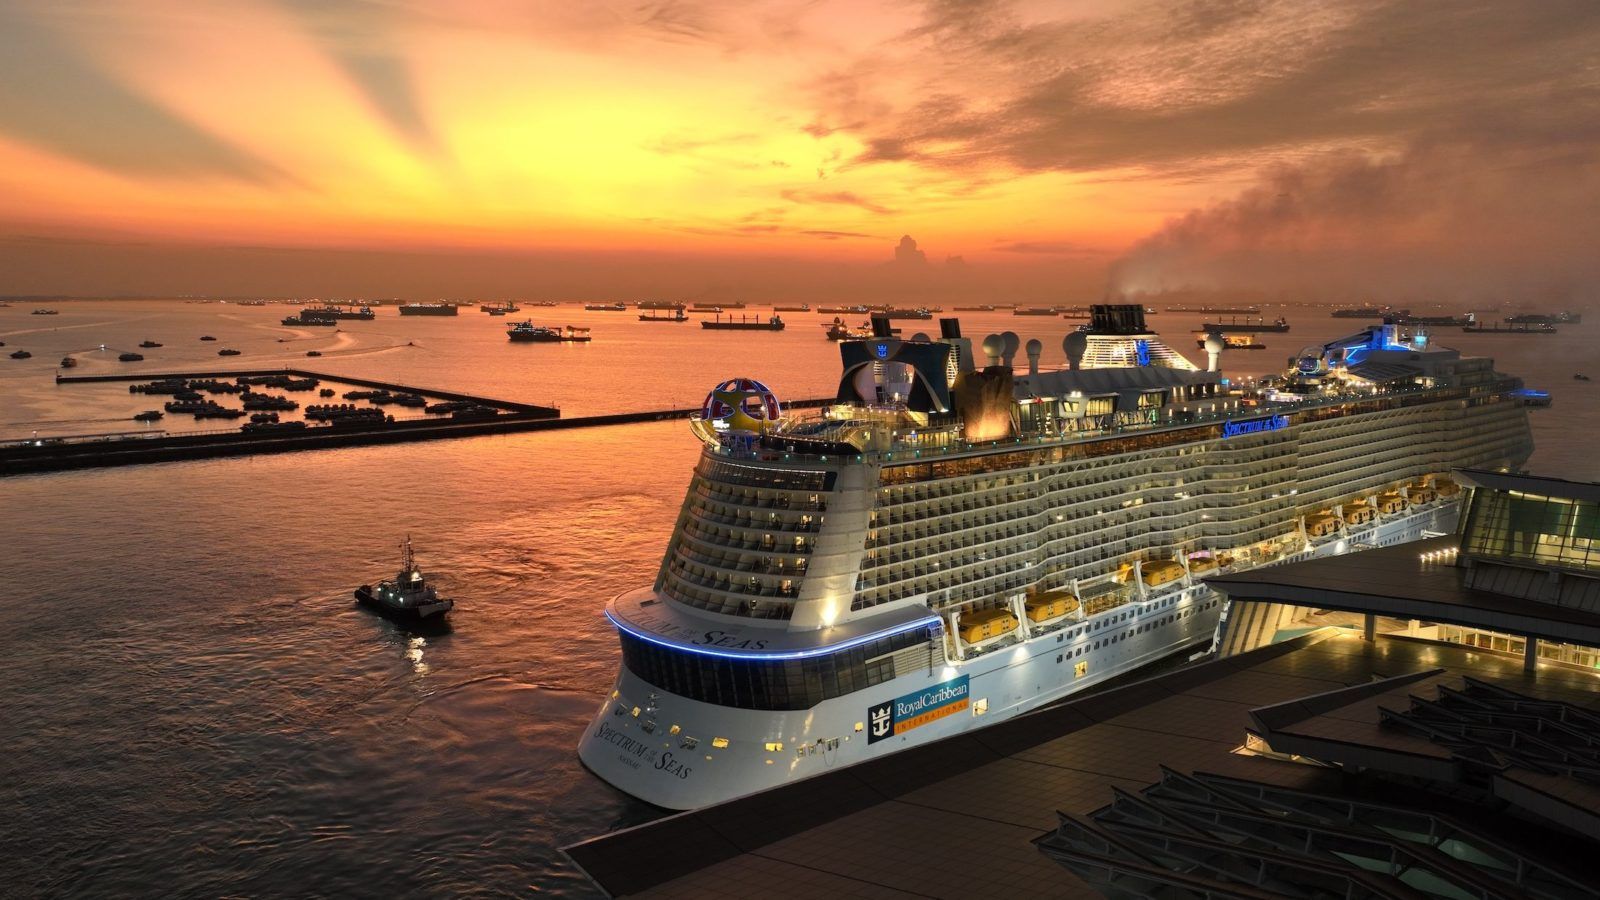 Royal Caribbean’s Spectrum of the Seas: An action-packed adventure on water